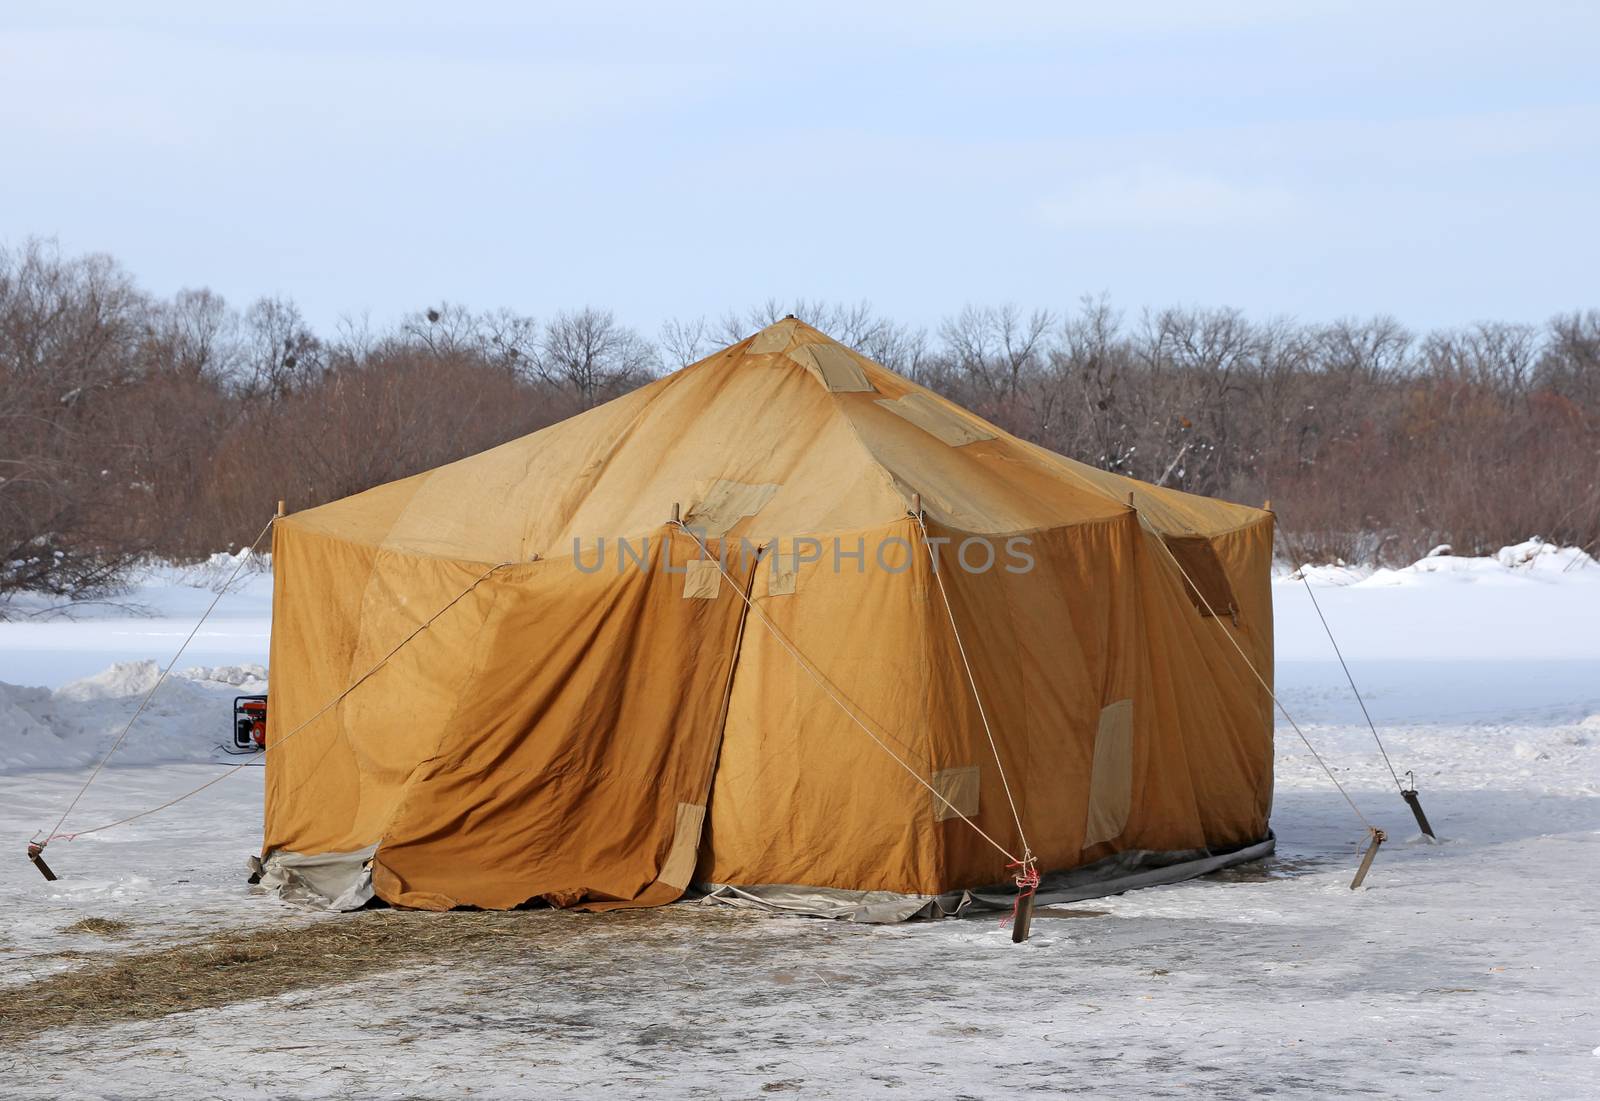 Military khaki tent in the snow polar region in a forest.